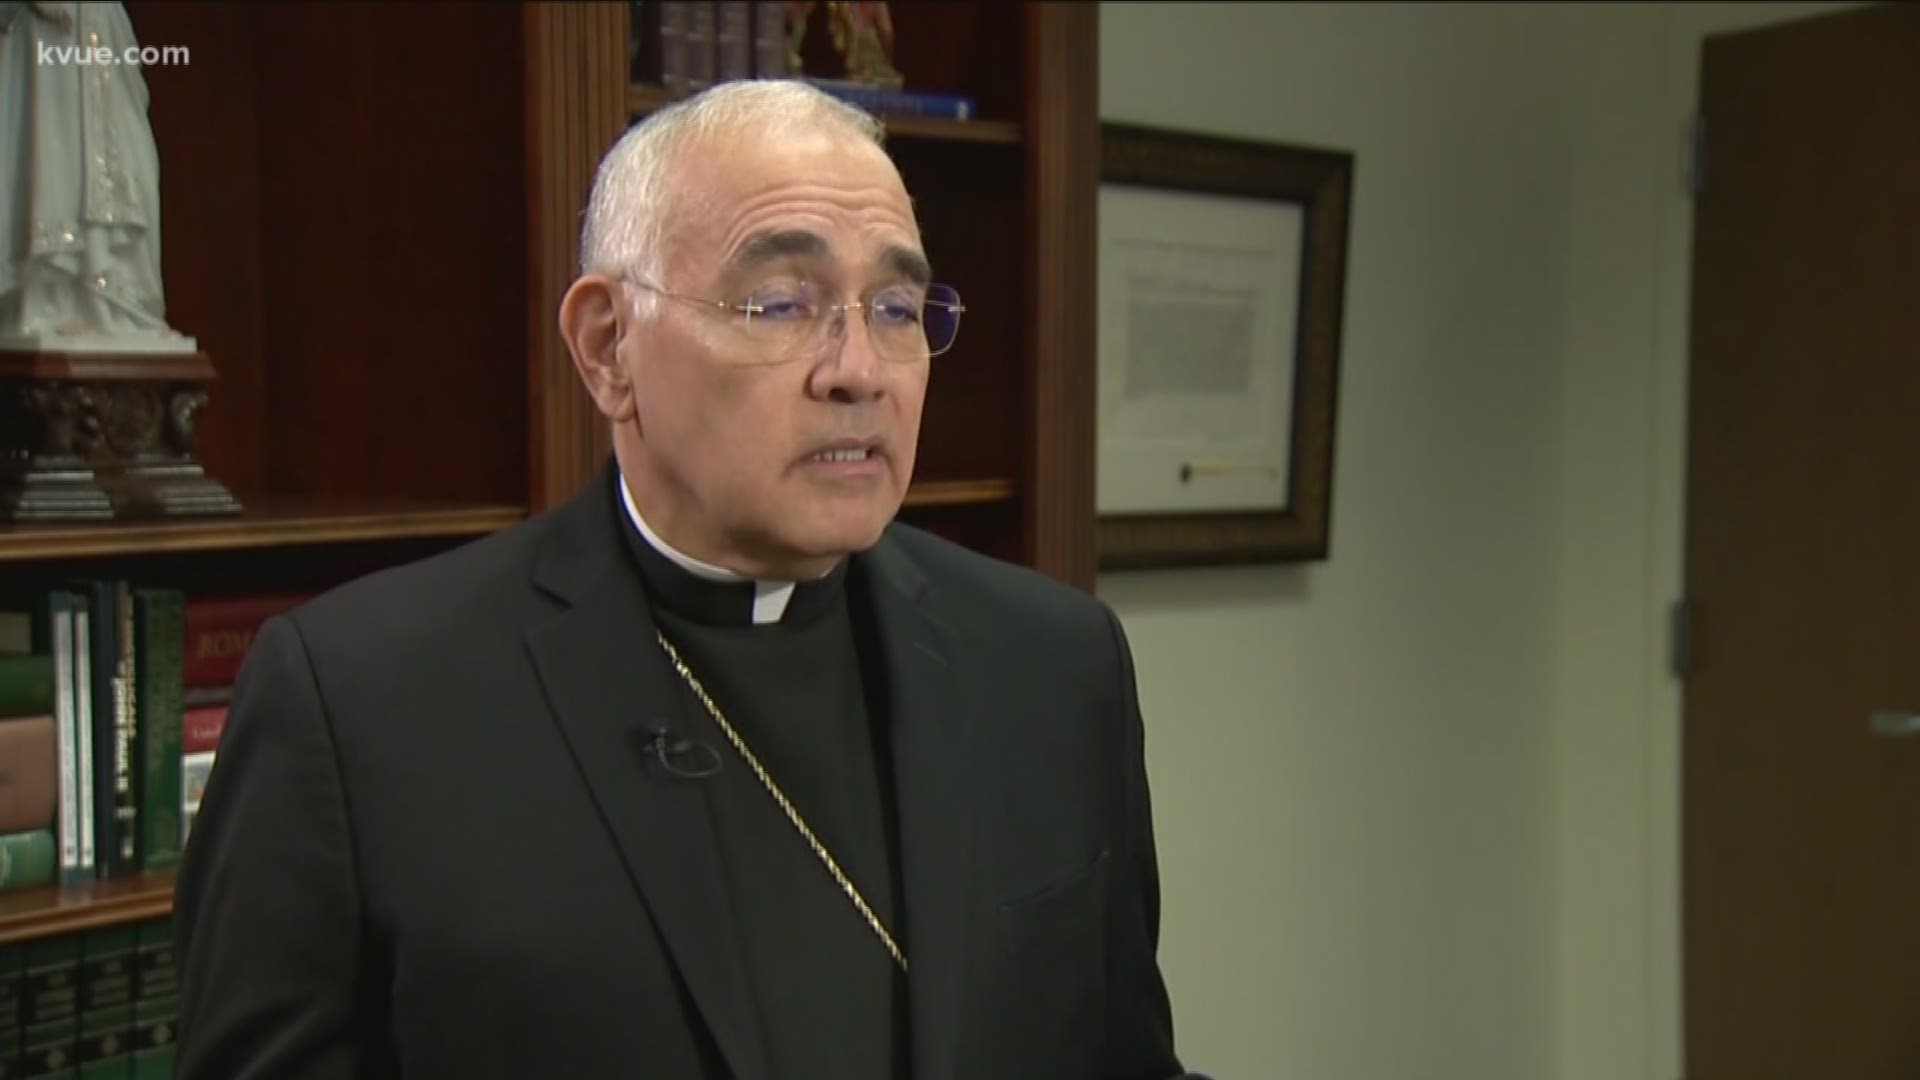 The Catholic Diocese of Austin has released the names of 22 clergy members who have been "credibly accused" of sexual assault involving minors.